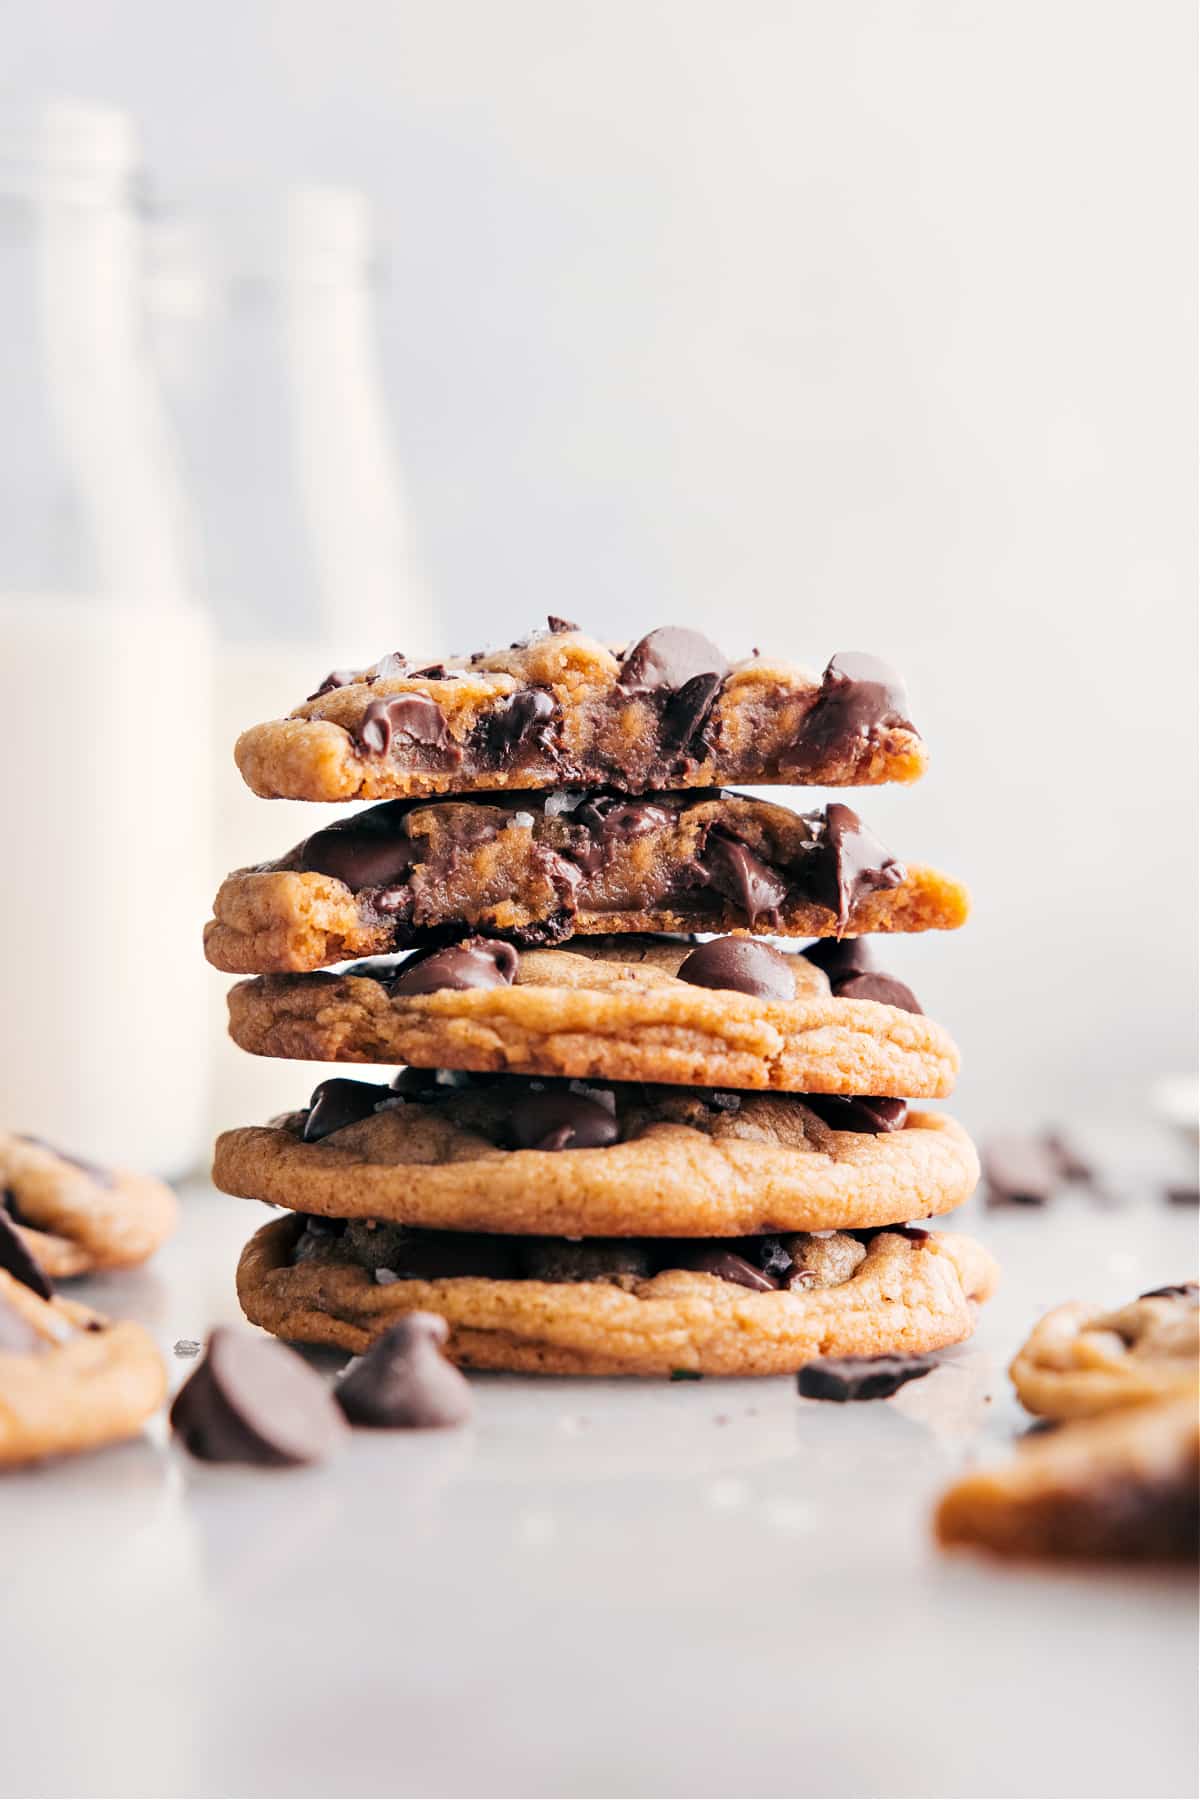 https://www.chelseasmessyapron.com/wp-content/uploads/2019/03/Chewy-Chocolate-Chip-Cookies-ChelseasMessyApron-1200-1.jpeg